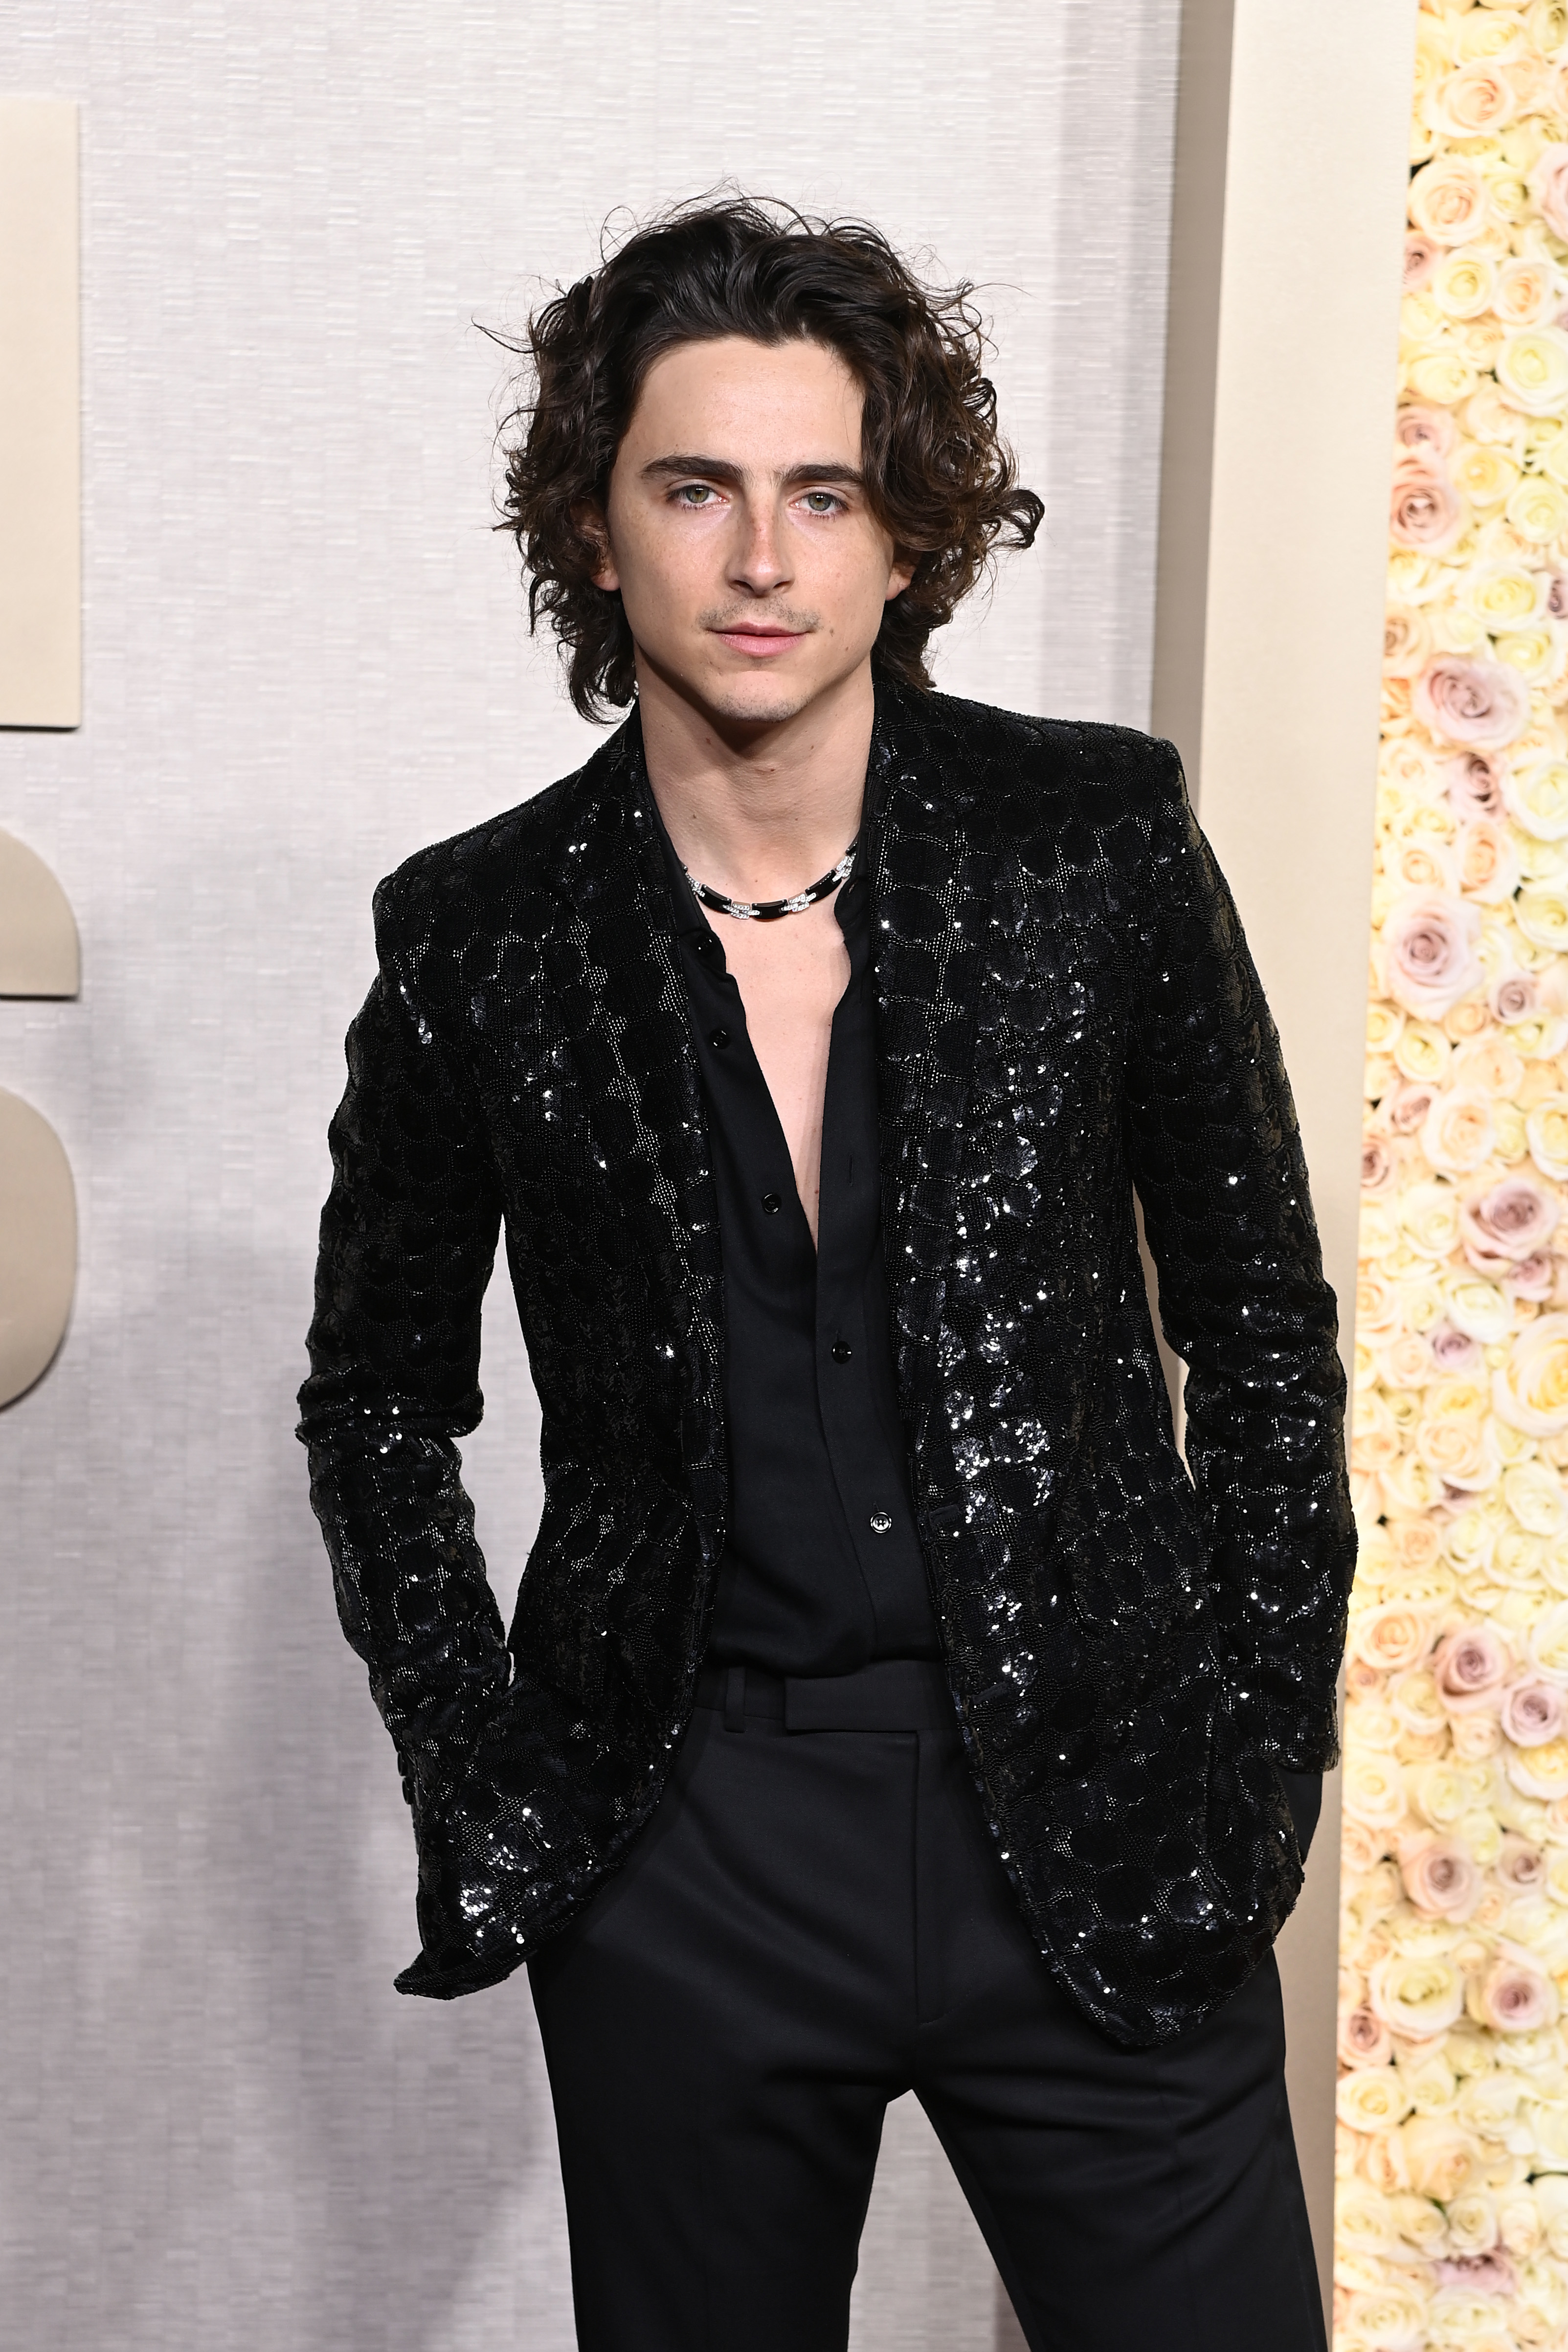 closeup of timmy in a suit at an event